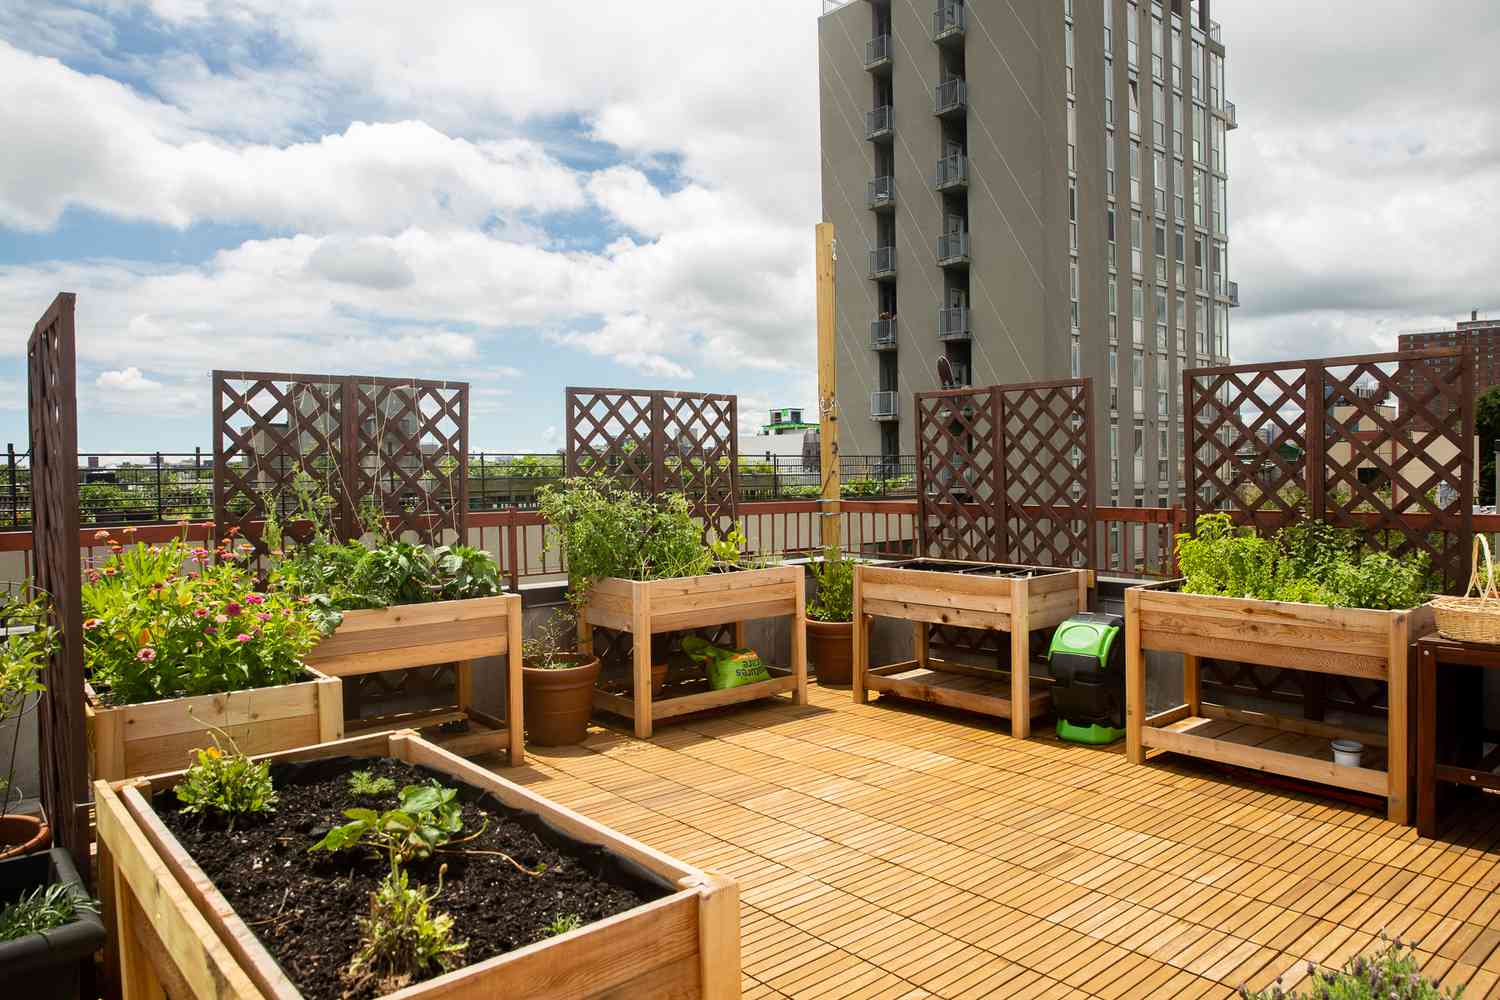 Urban rooftop garden on raised wooden planters with brown trellises